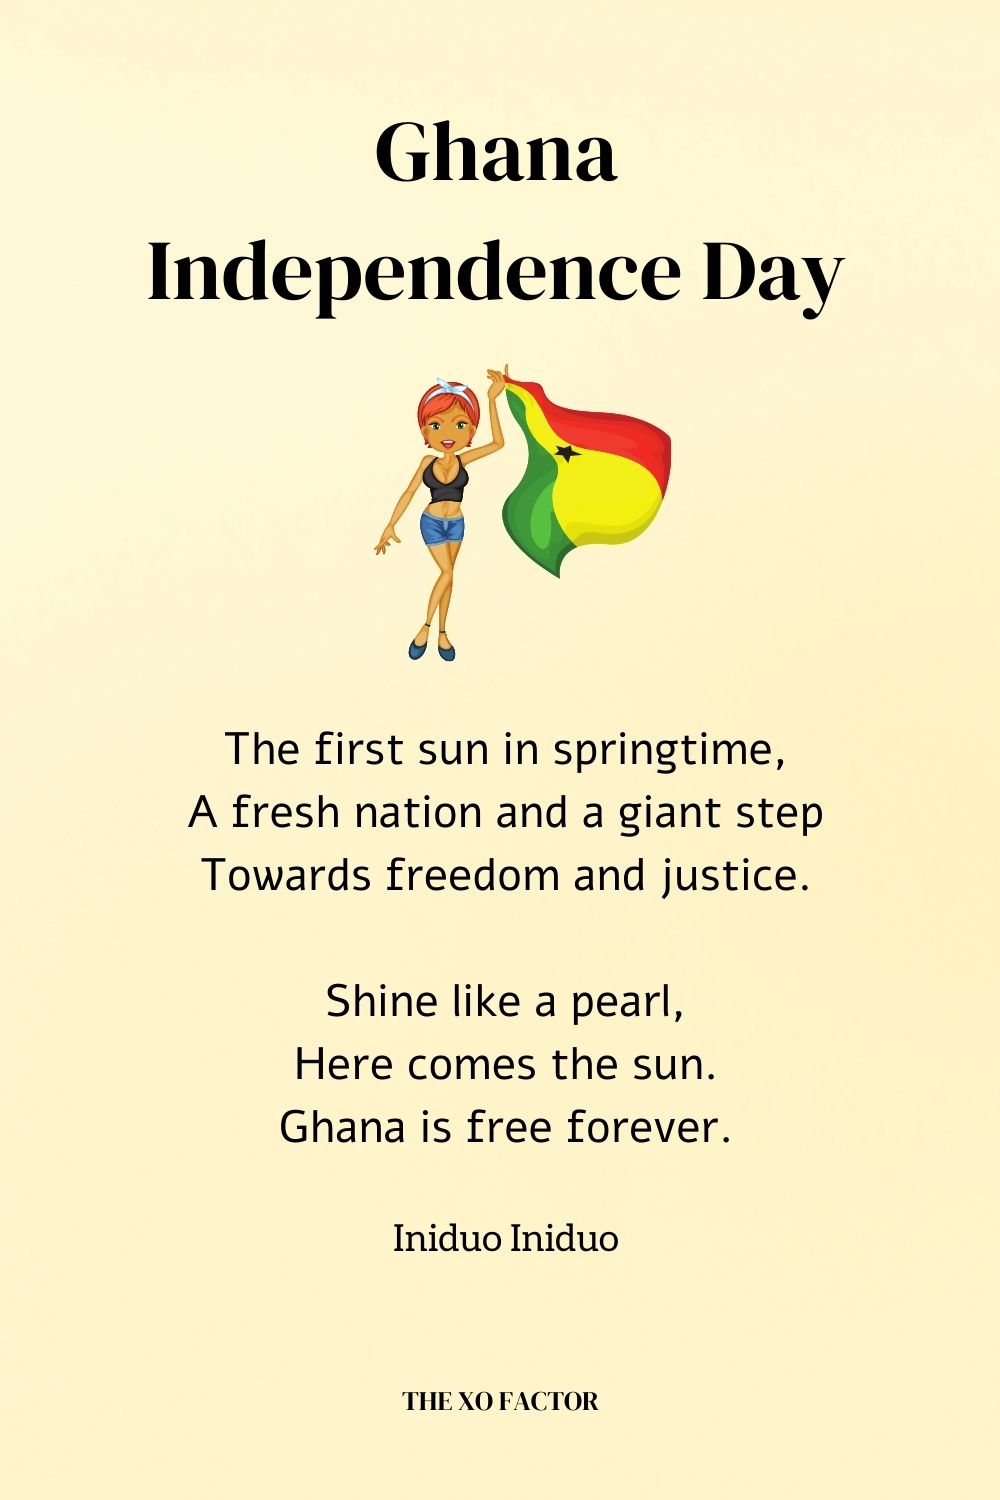 Ghana Independence Day by Iniduo Iniduo